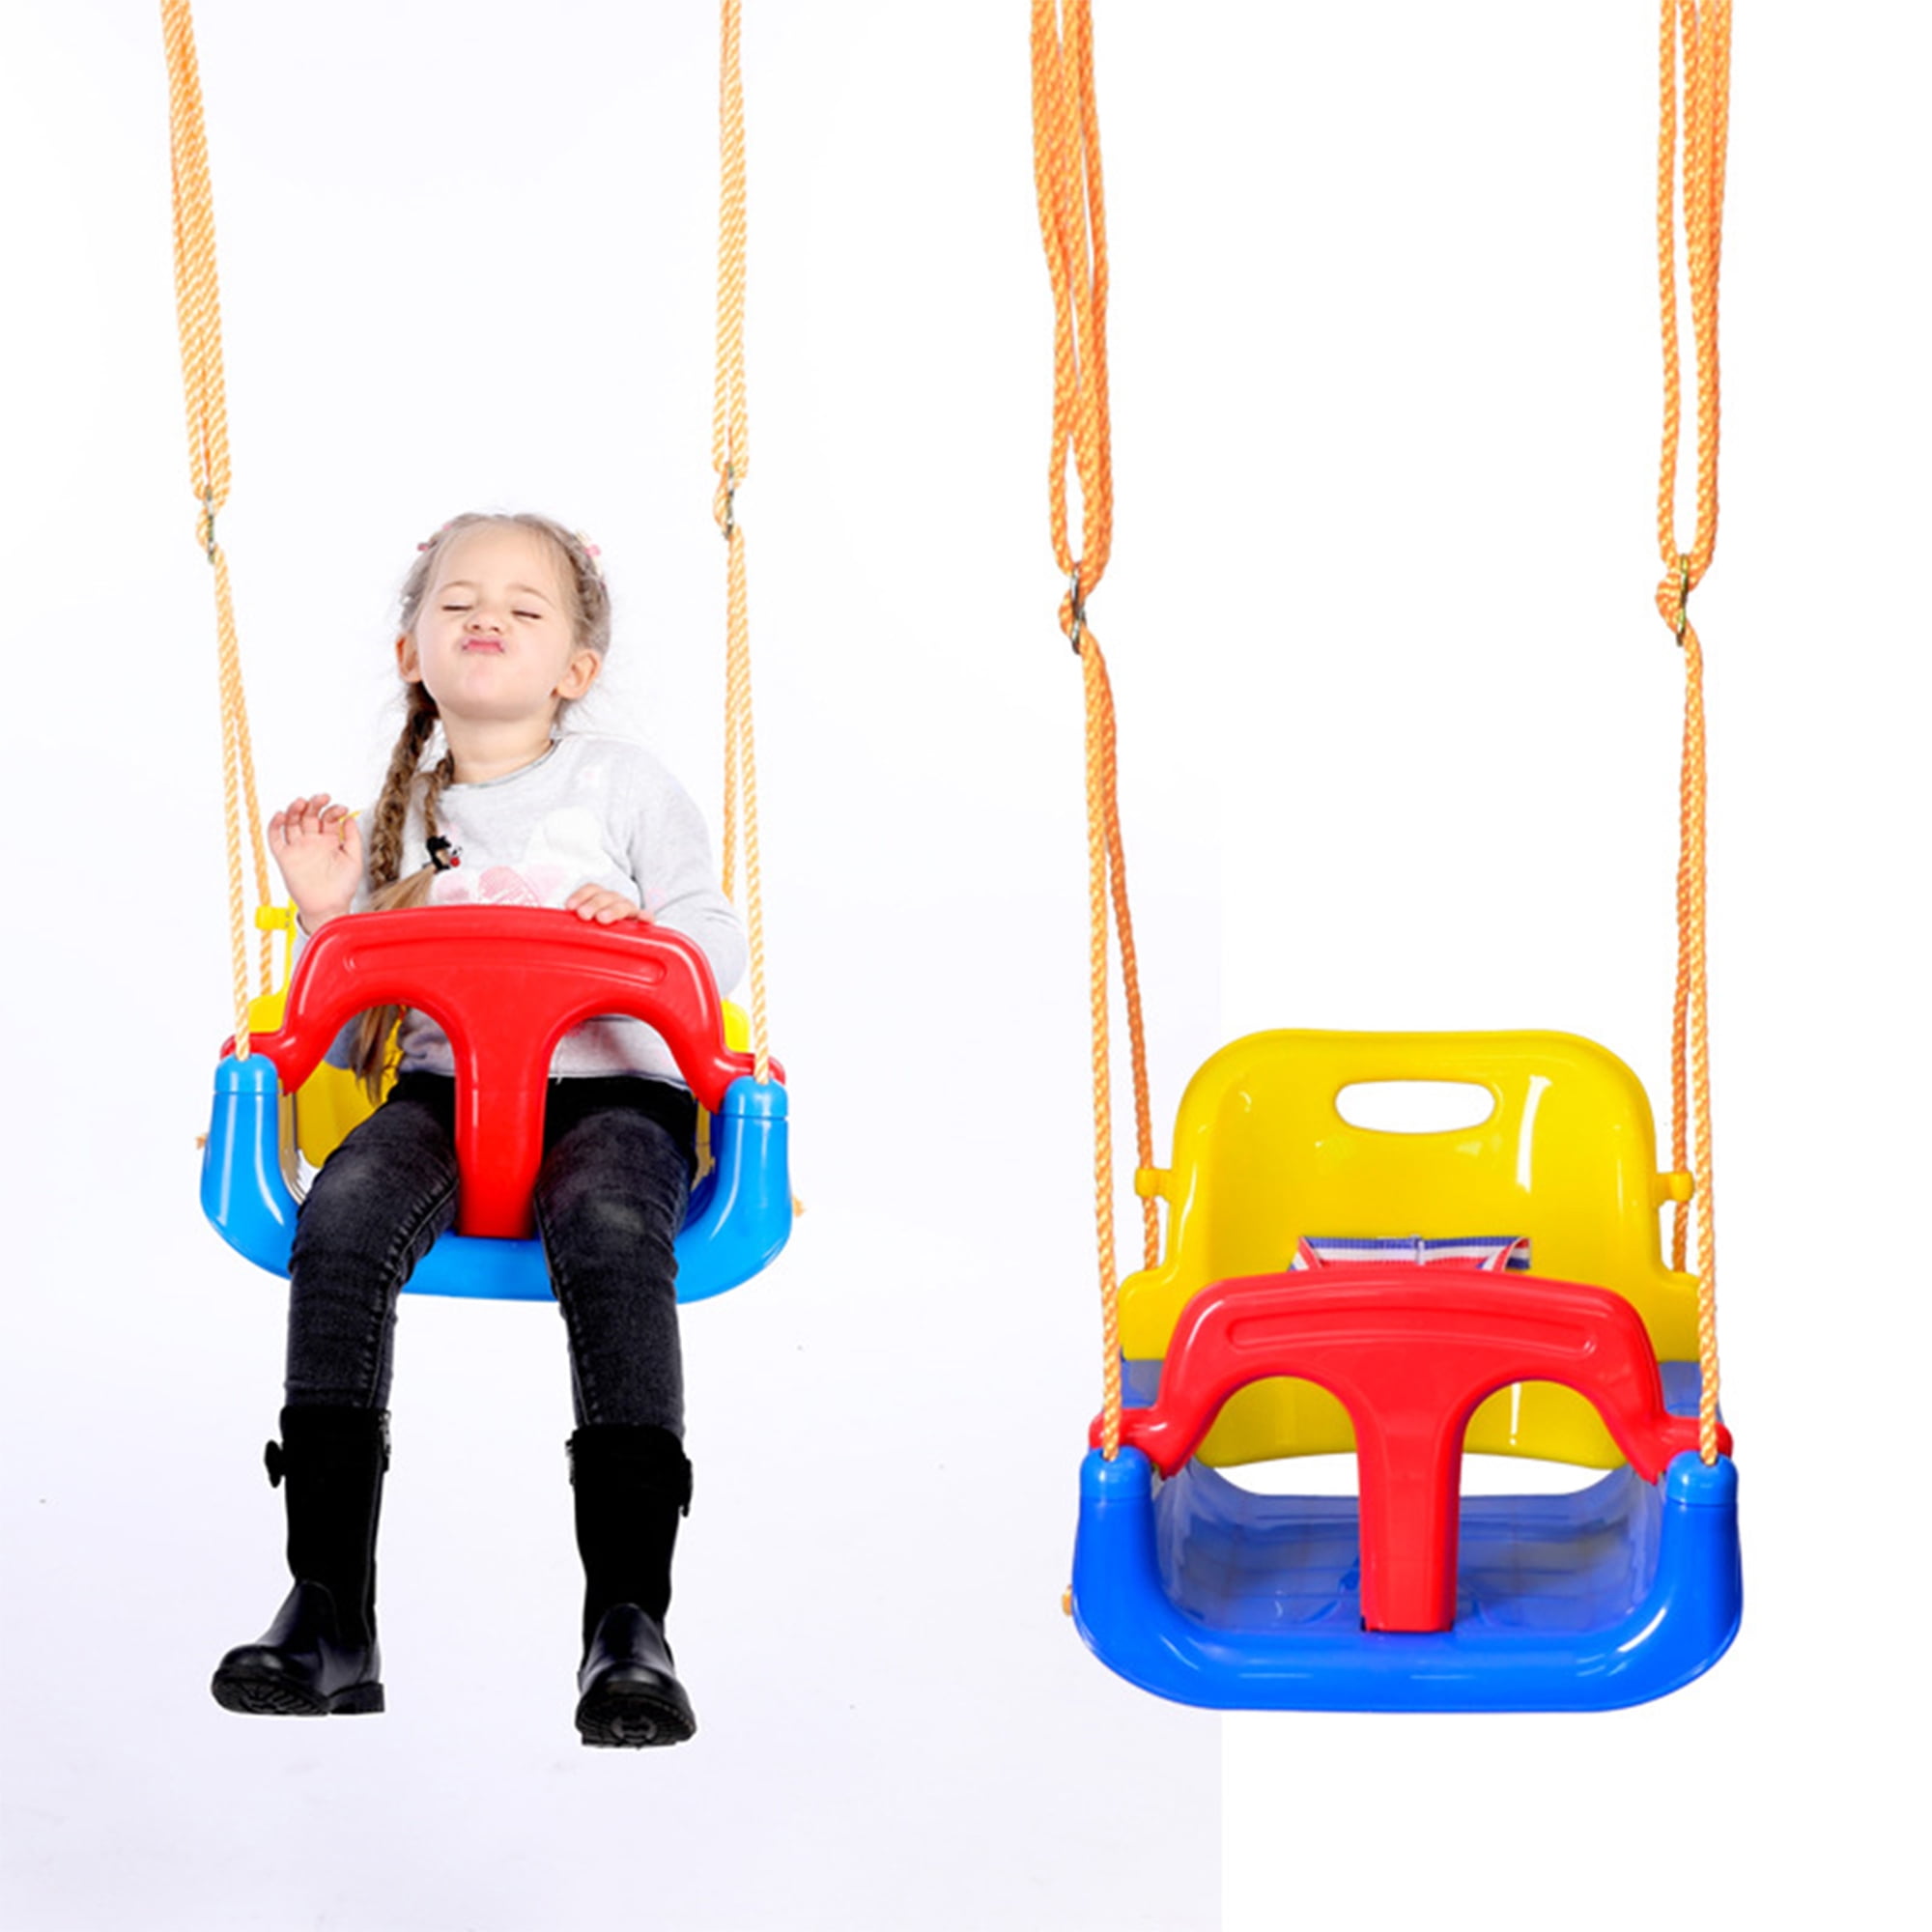 Childs Toddler Adjustable Outdoor Garden Rope Safety Safe Swing Seat Fun 